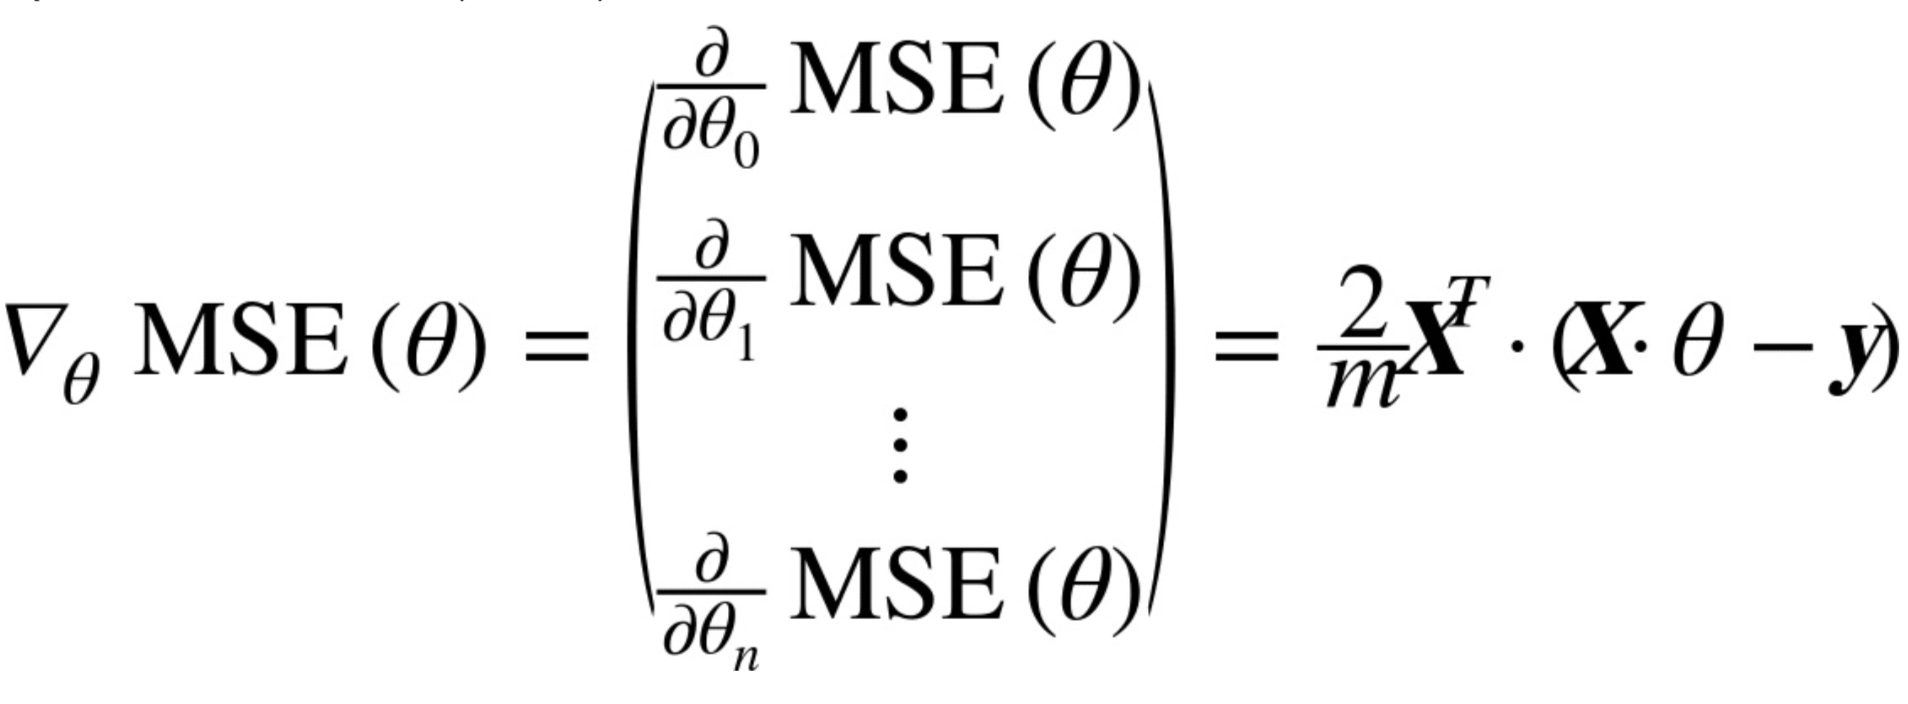 equation4-6.png